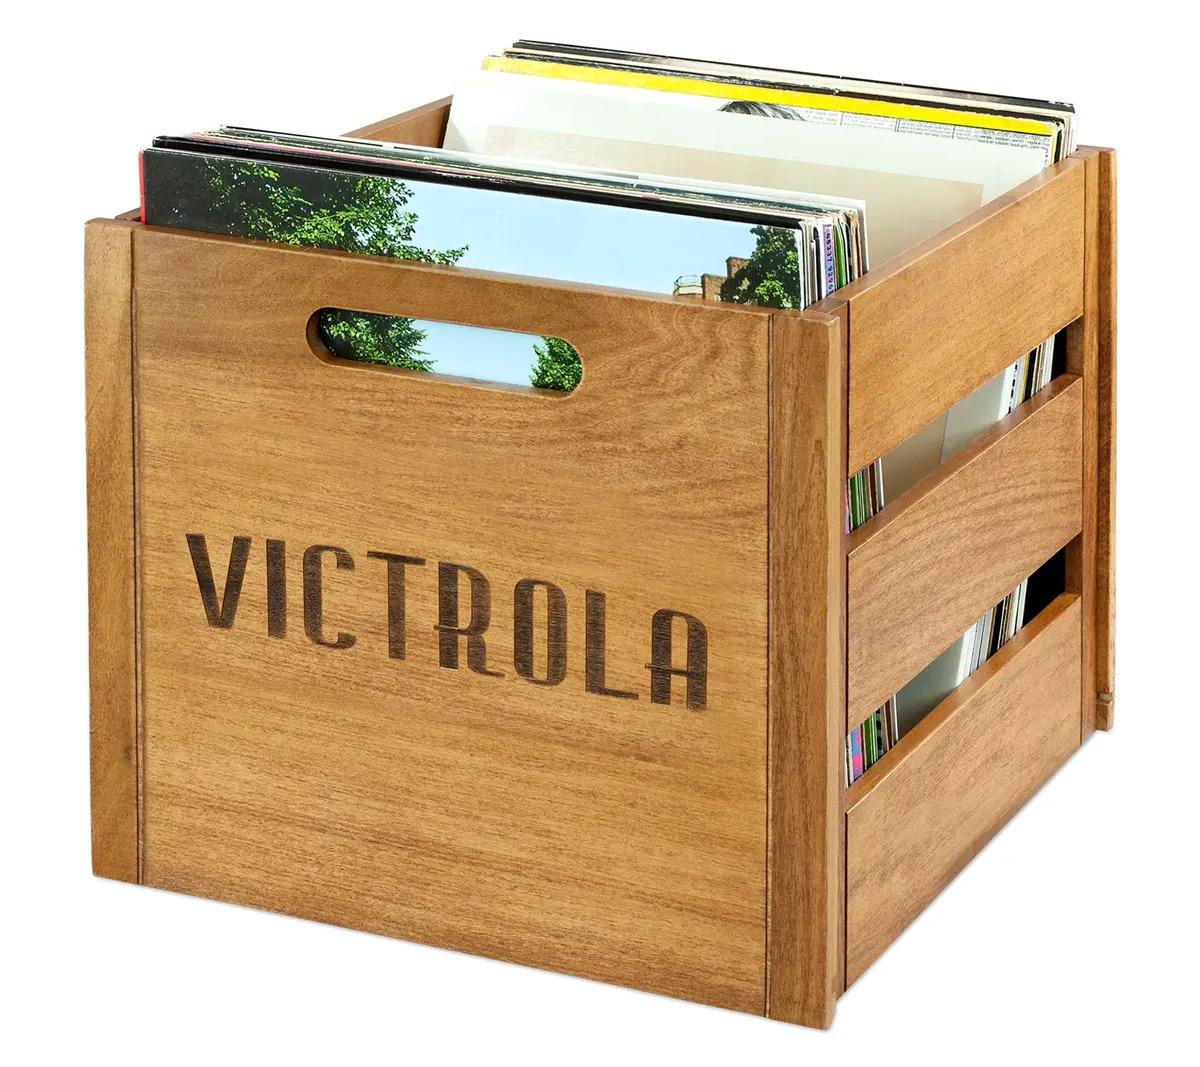 Victrola Vinyl Record Wooden Storage Crate for $14.53